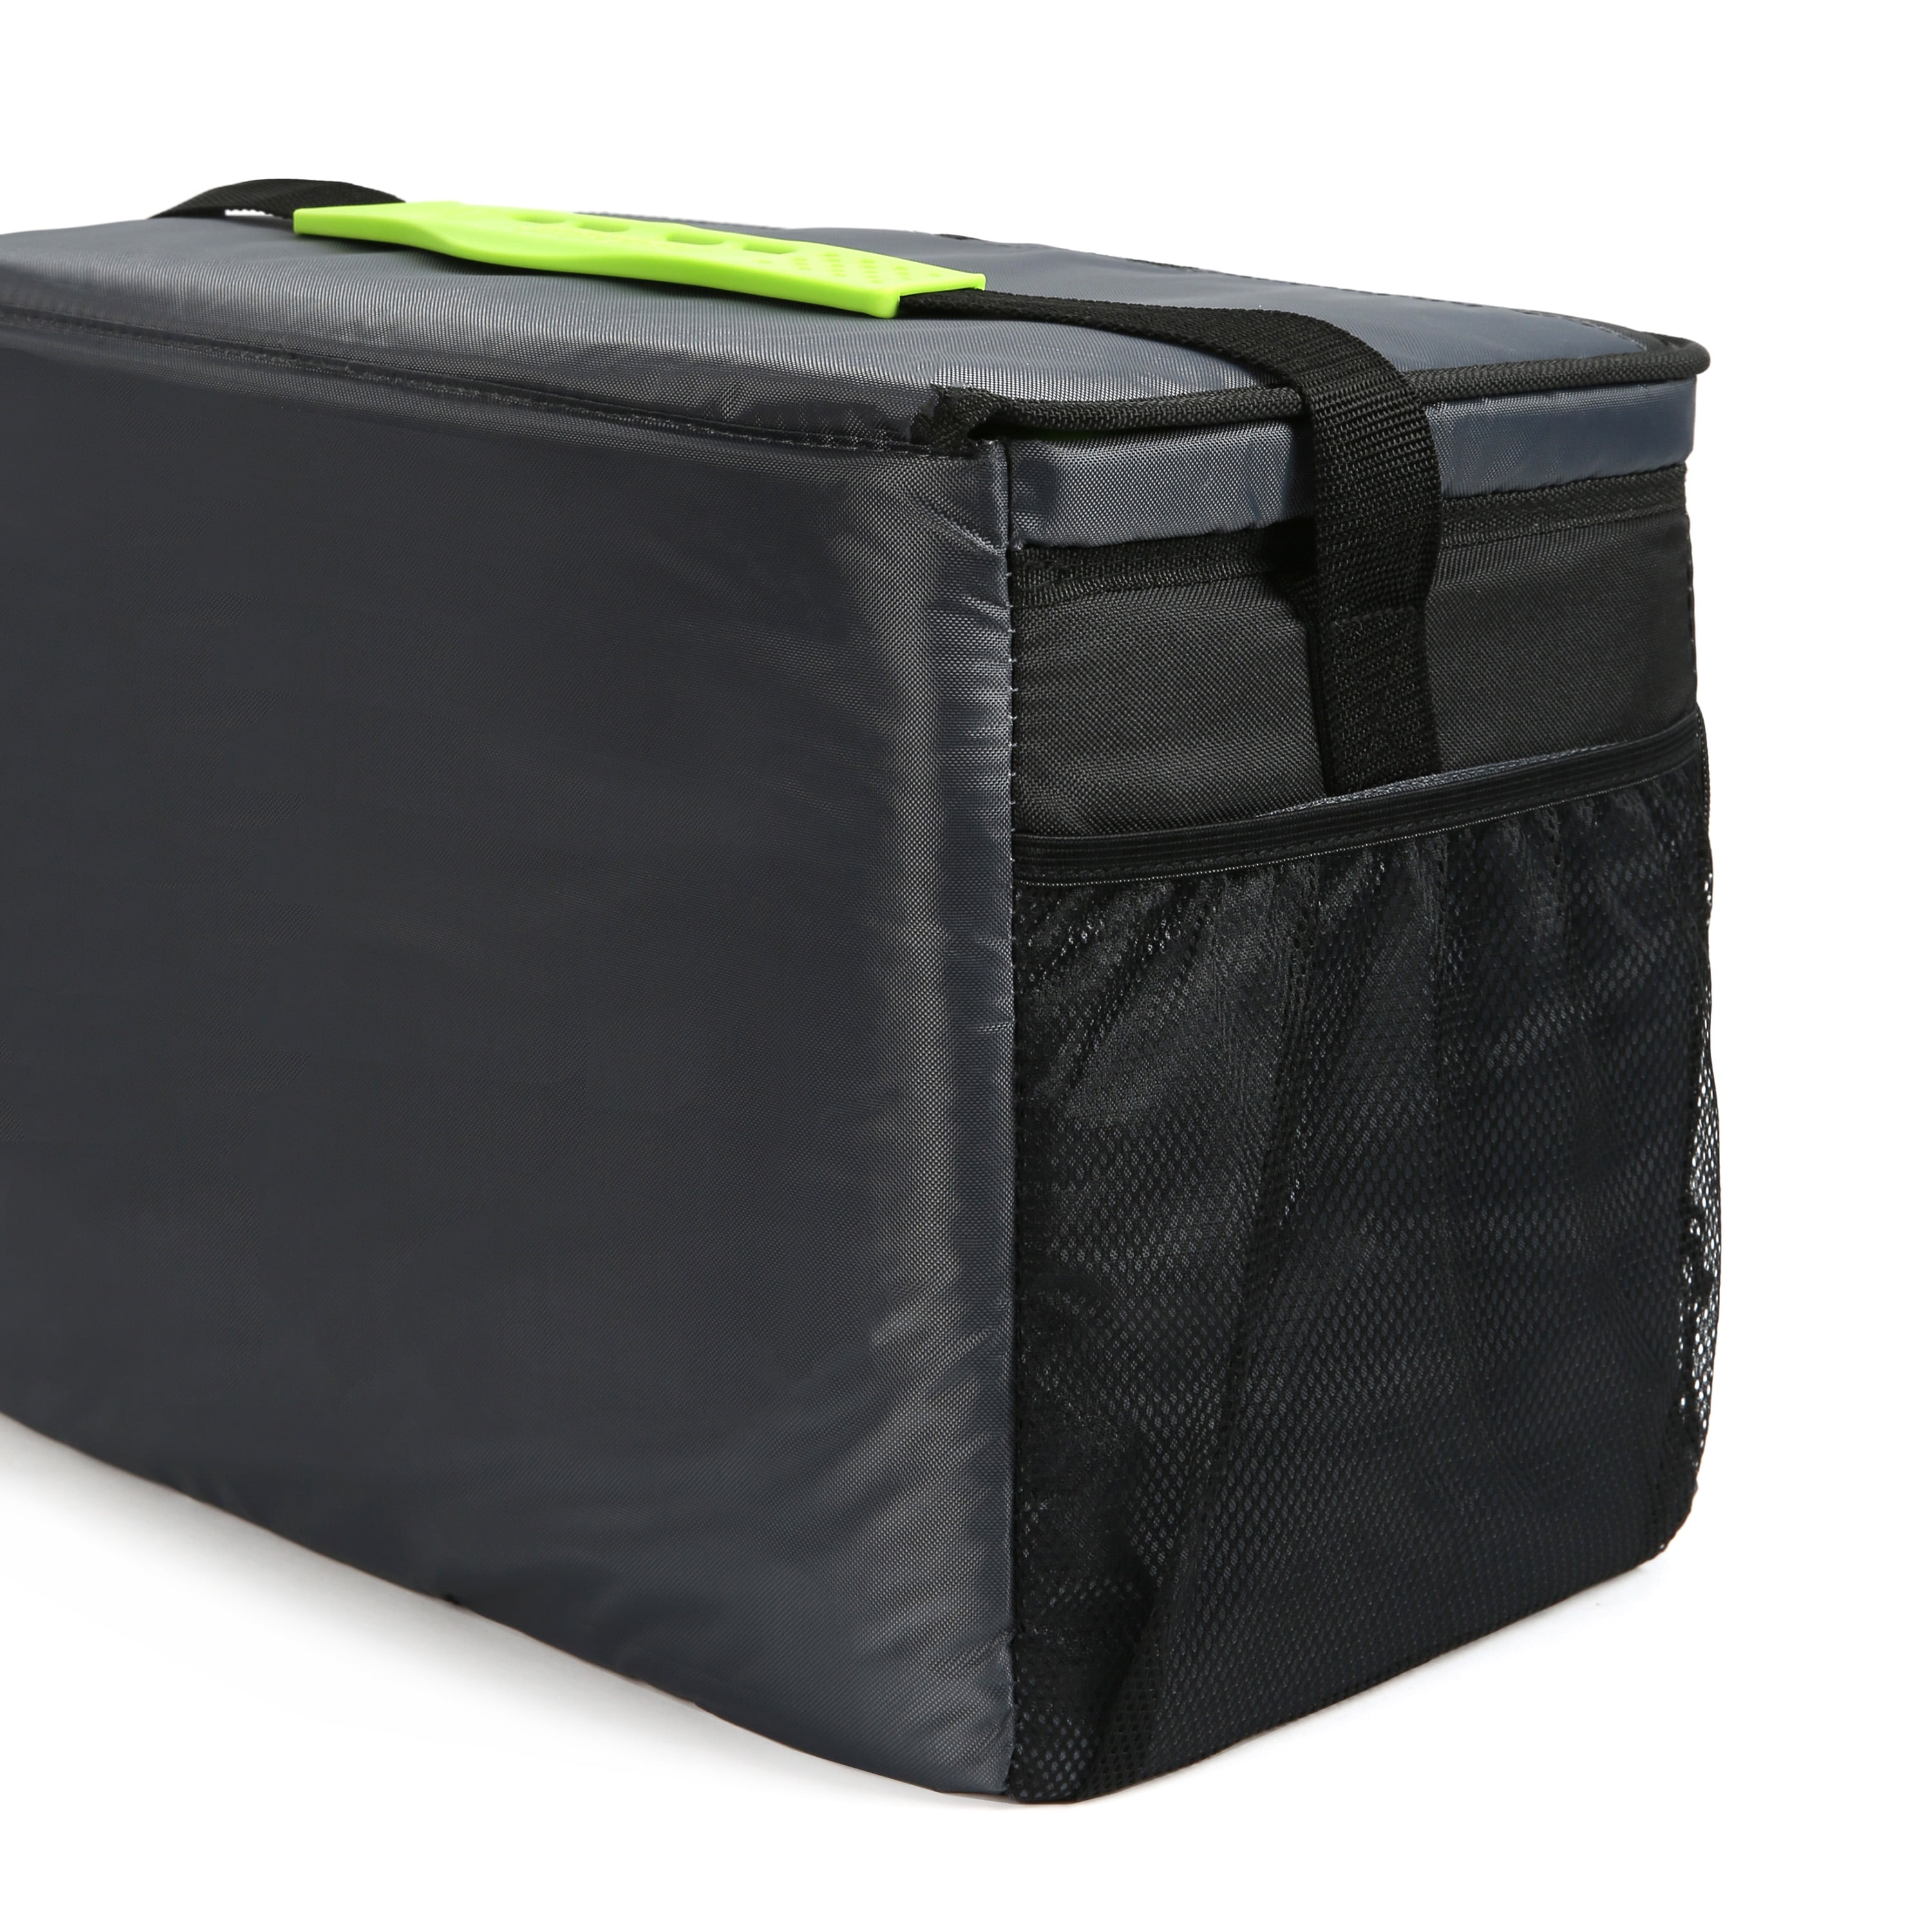 Zipperless Cooler 30 Can Black Gray green Polyester Patented Adjustable Strap 